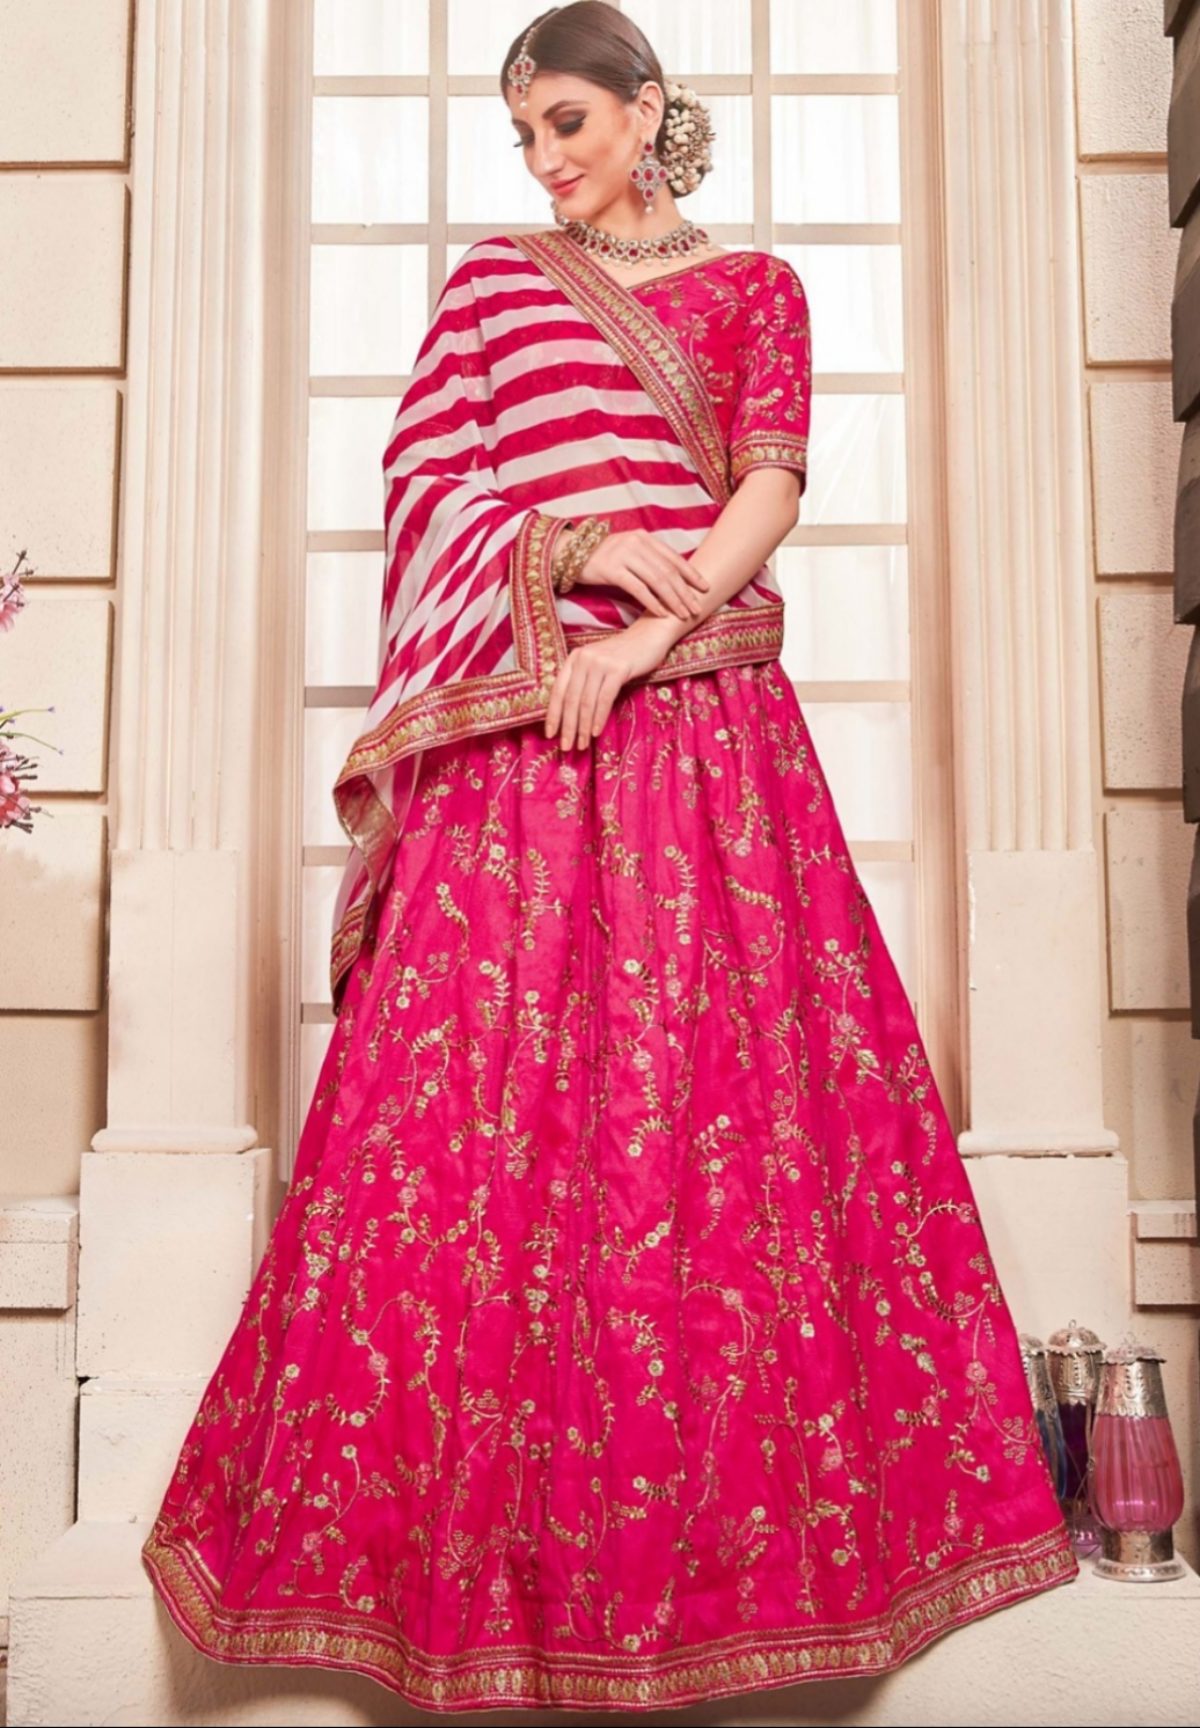 Is this appropriate to wear as a guest to an Indian wedding? :  r/DesiWeddings